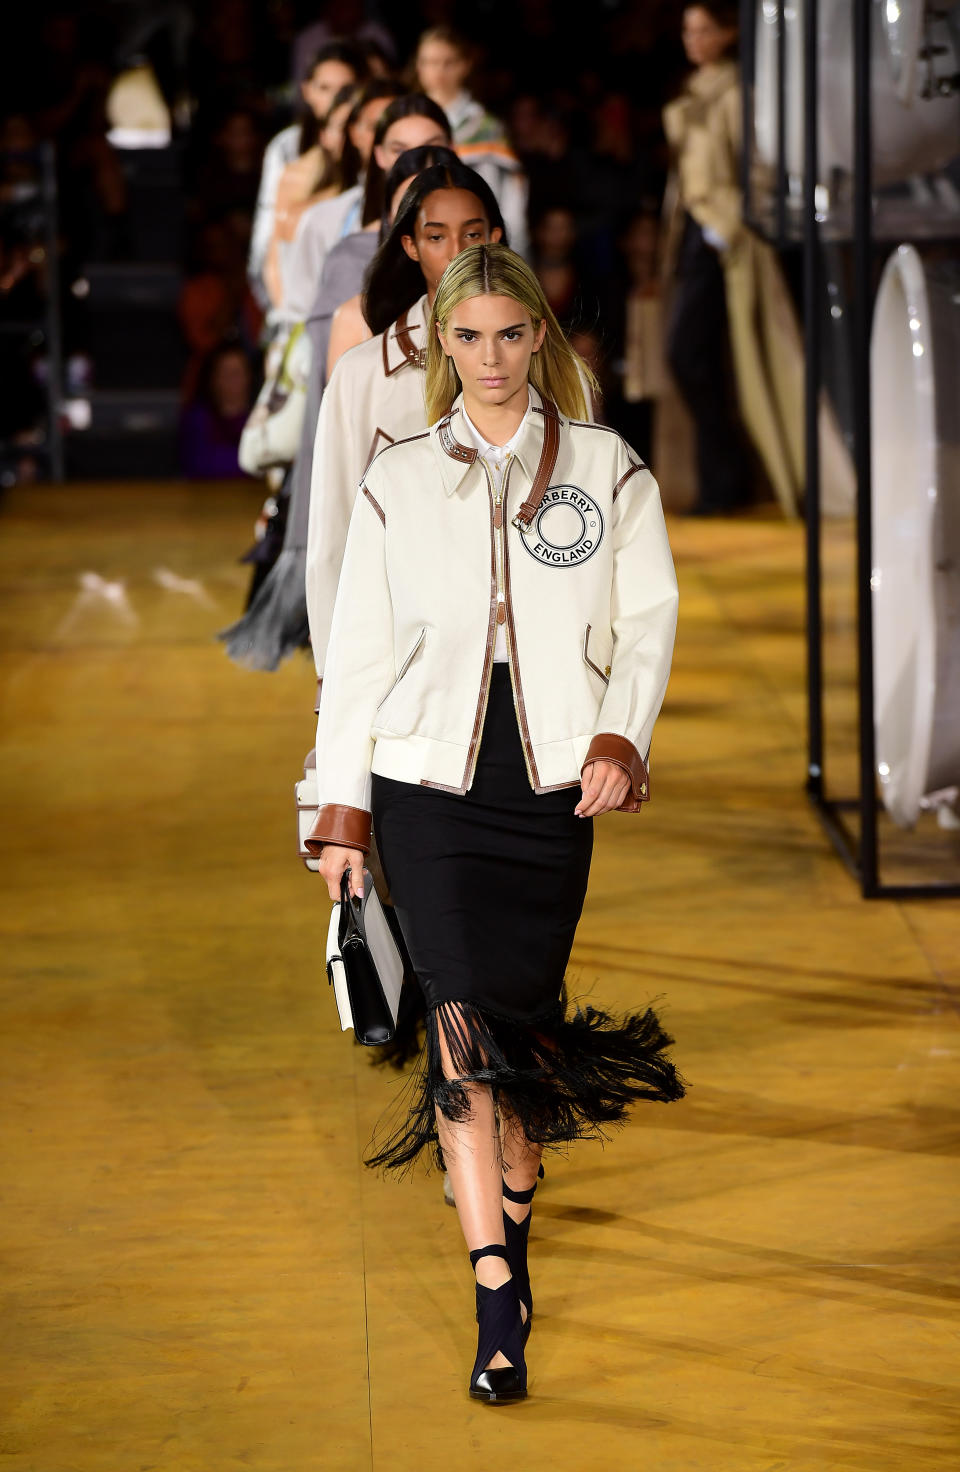 Kendall Jenner lead the finale at Burberry's spring/summer 2020 show. [Photo: Getty Images]